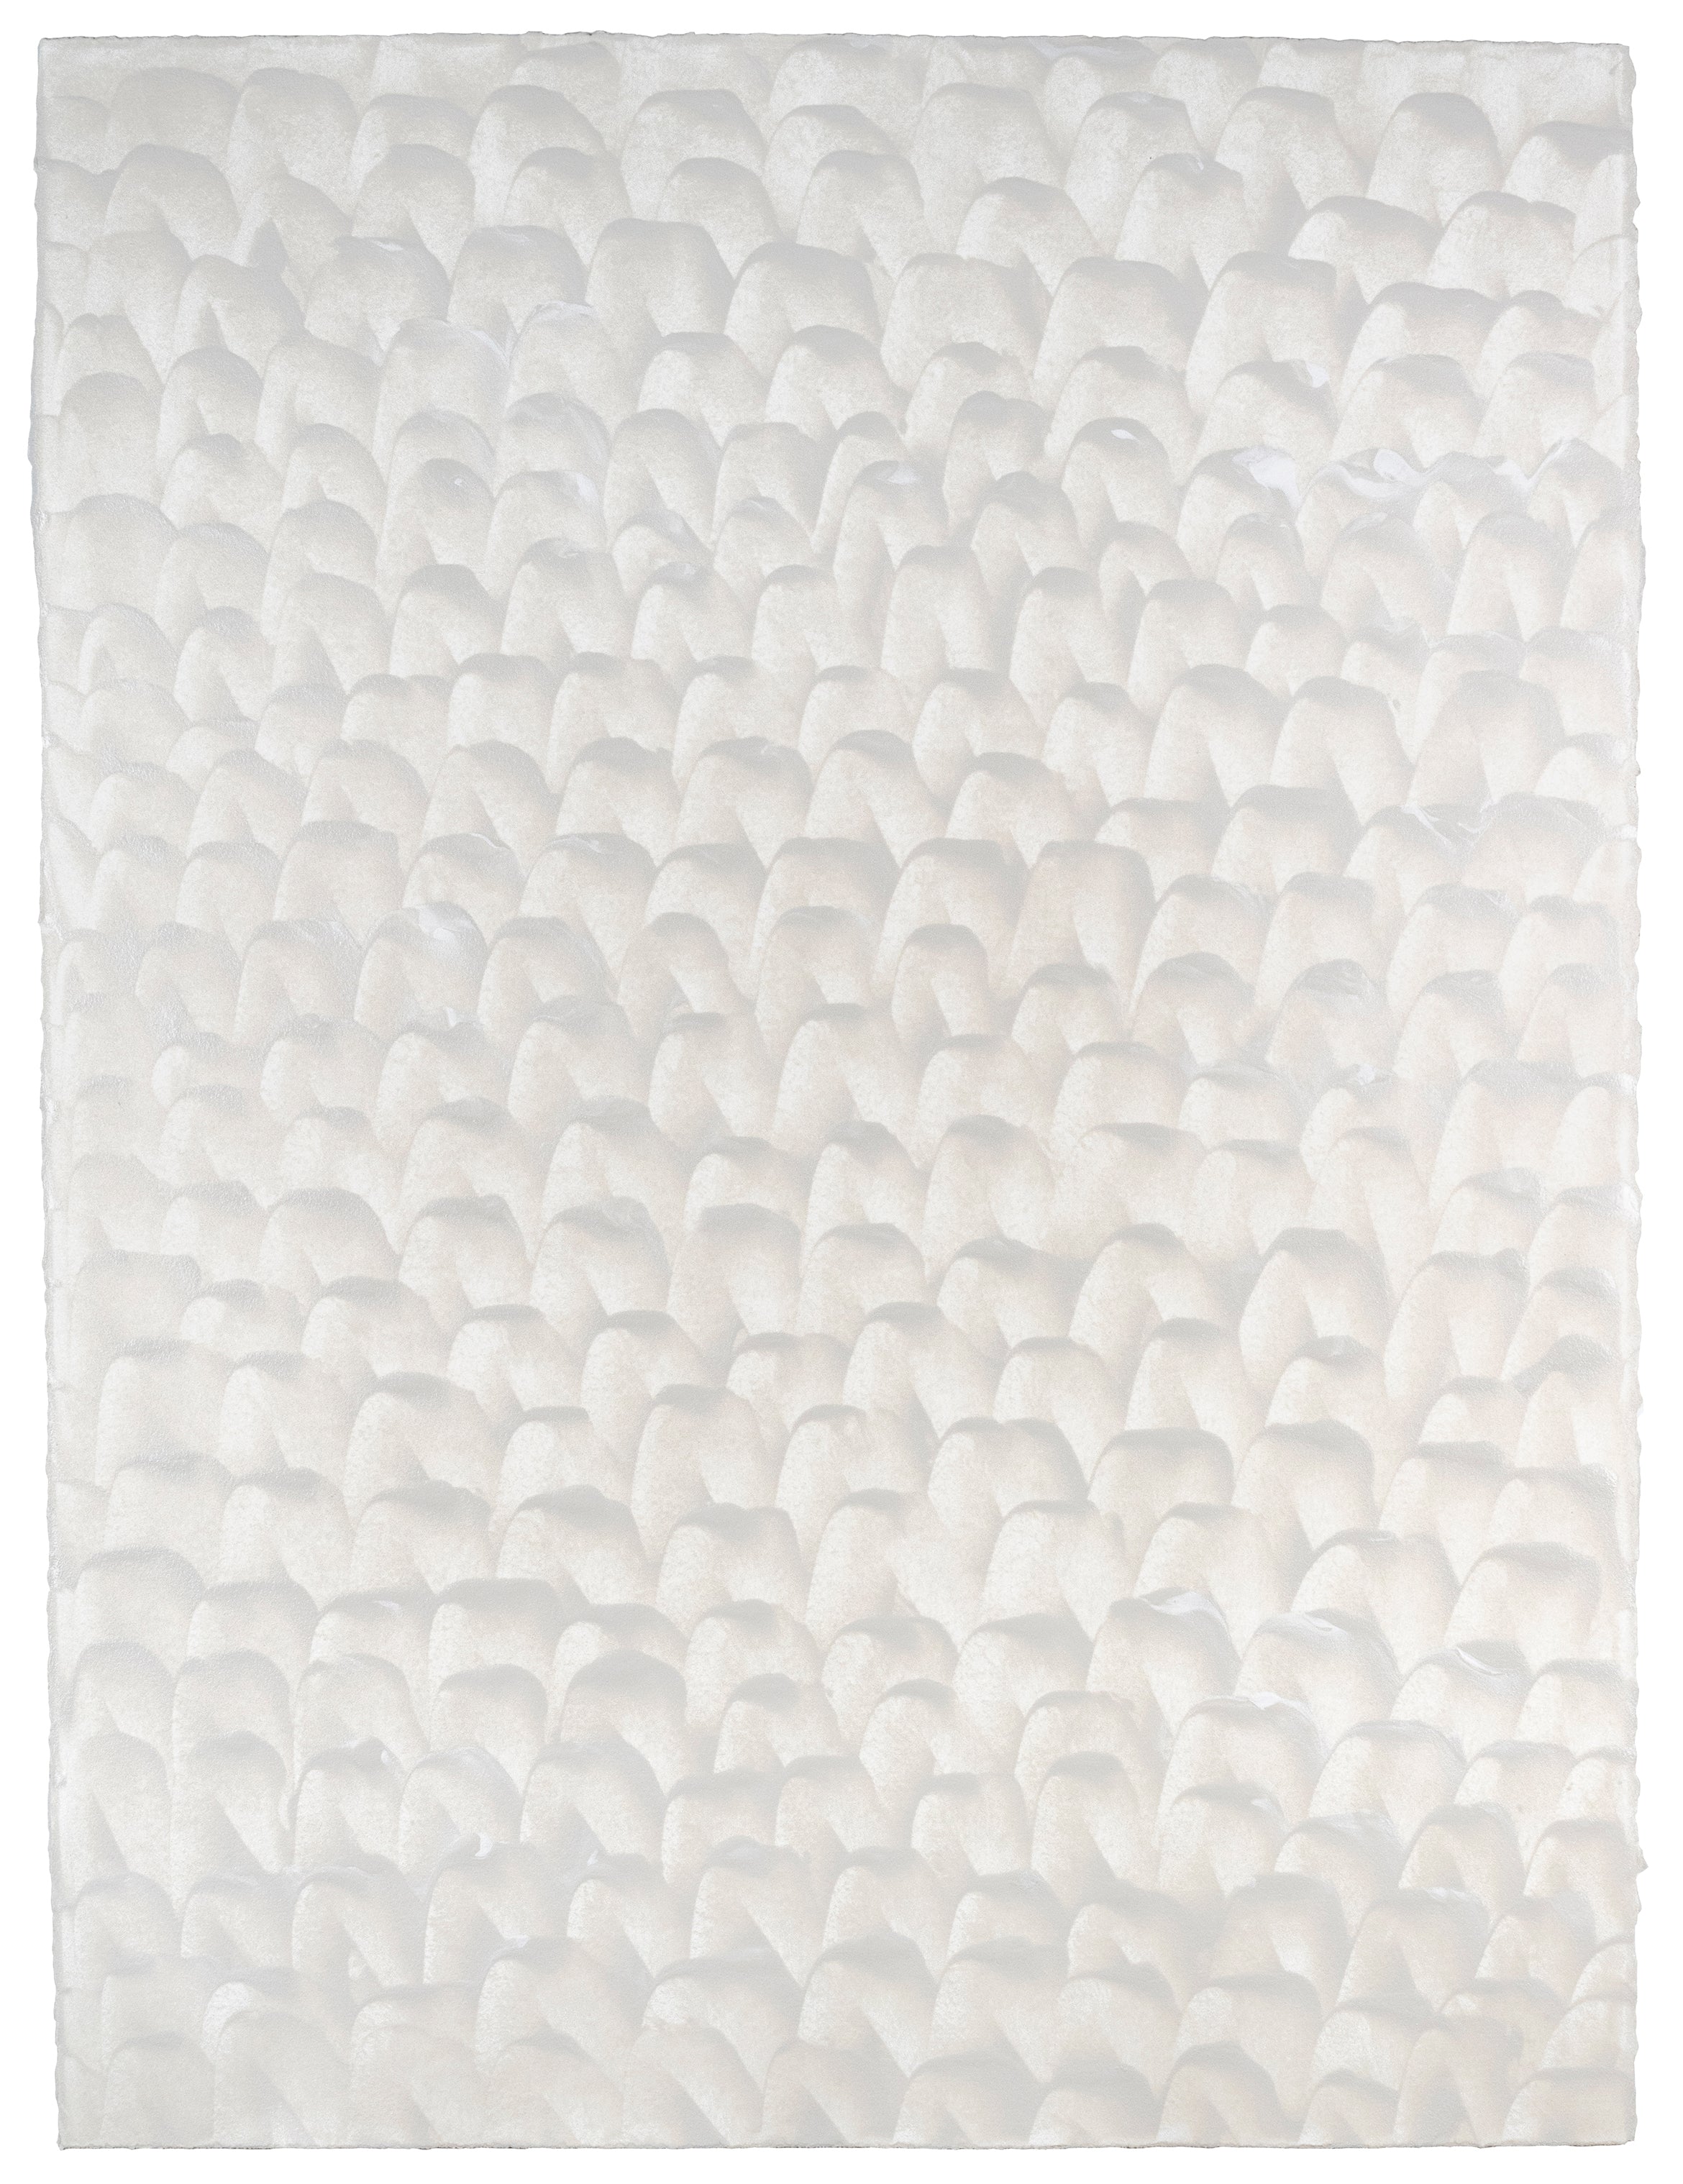 Sheet of hand-painted wallpaper with a repeating dappled texture in cream.